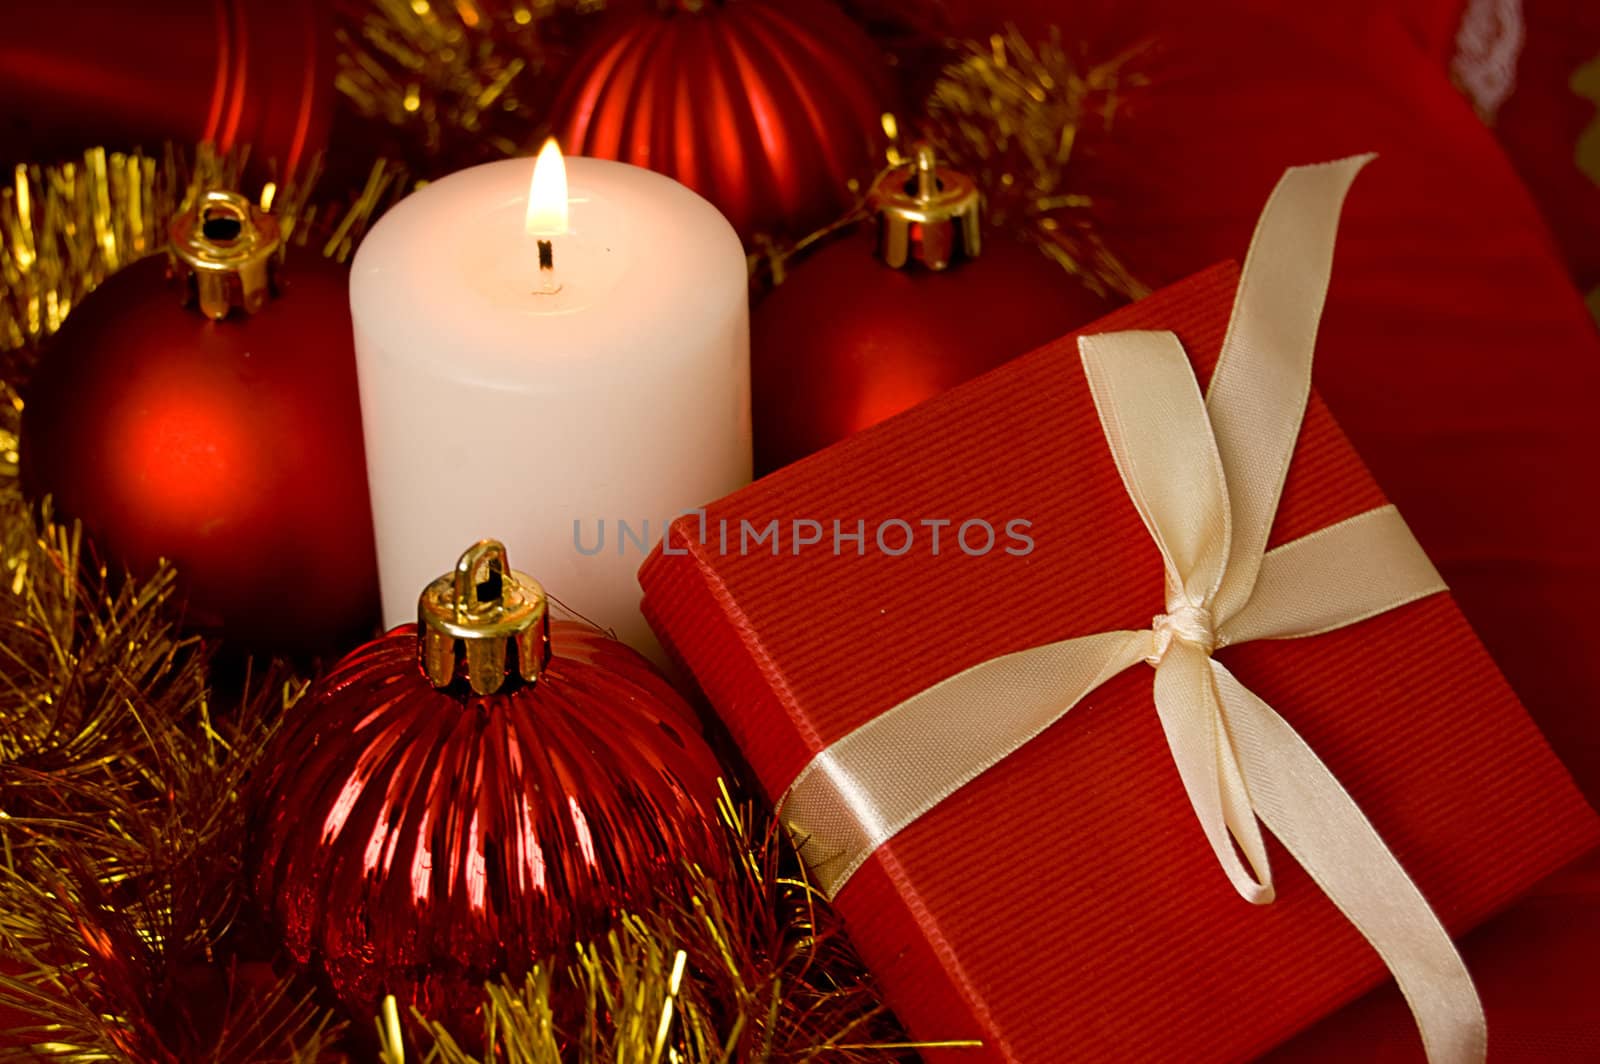 Red gift box and candle over Christmas background